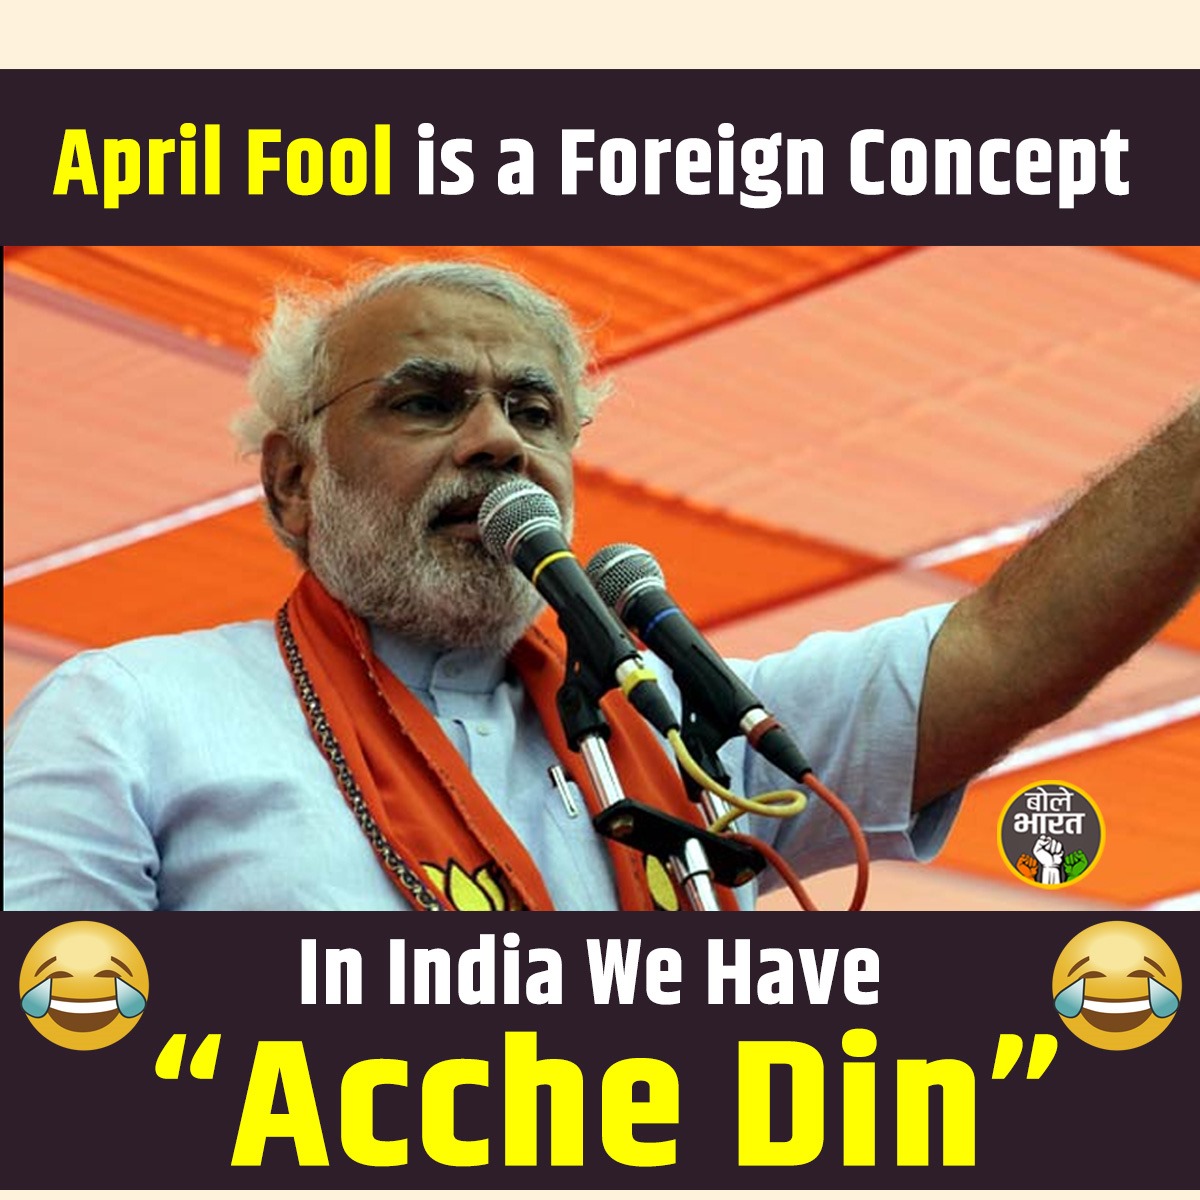 #AprilFoolsDay is a Foreign Concept, In India We have #AccheDin.

#BJP #Inflation #Crime #Rape #Corruption #Scam #Poverty #Unemployment #PSU #Adani #Youth #Jumla